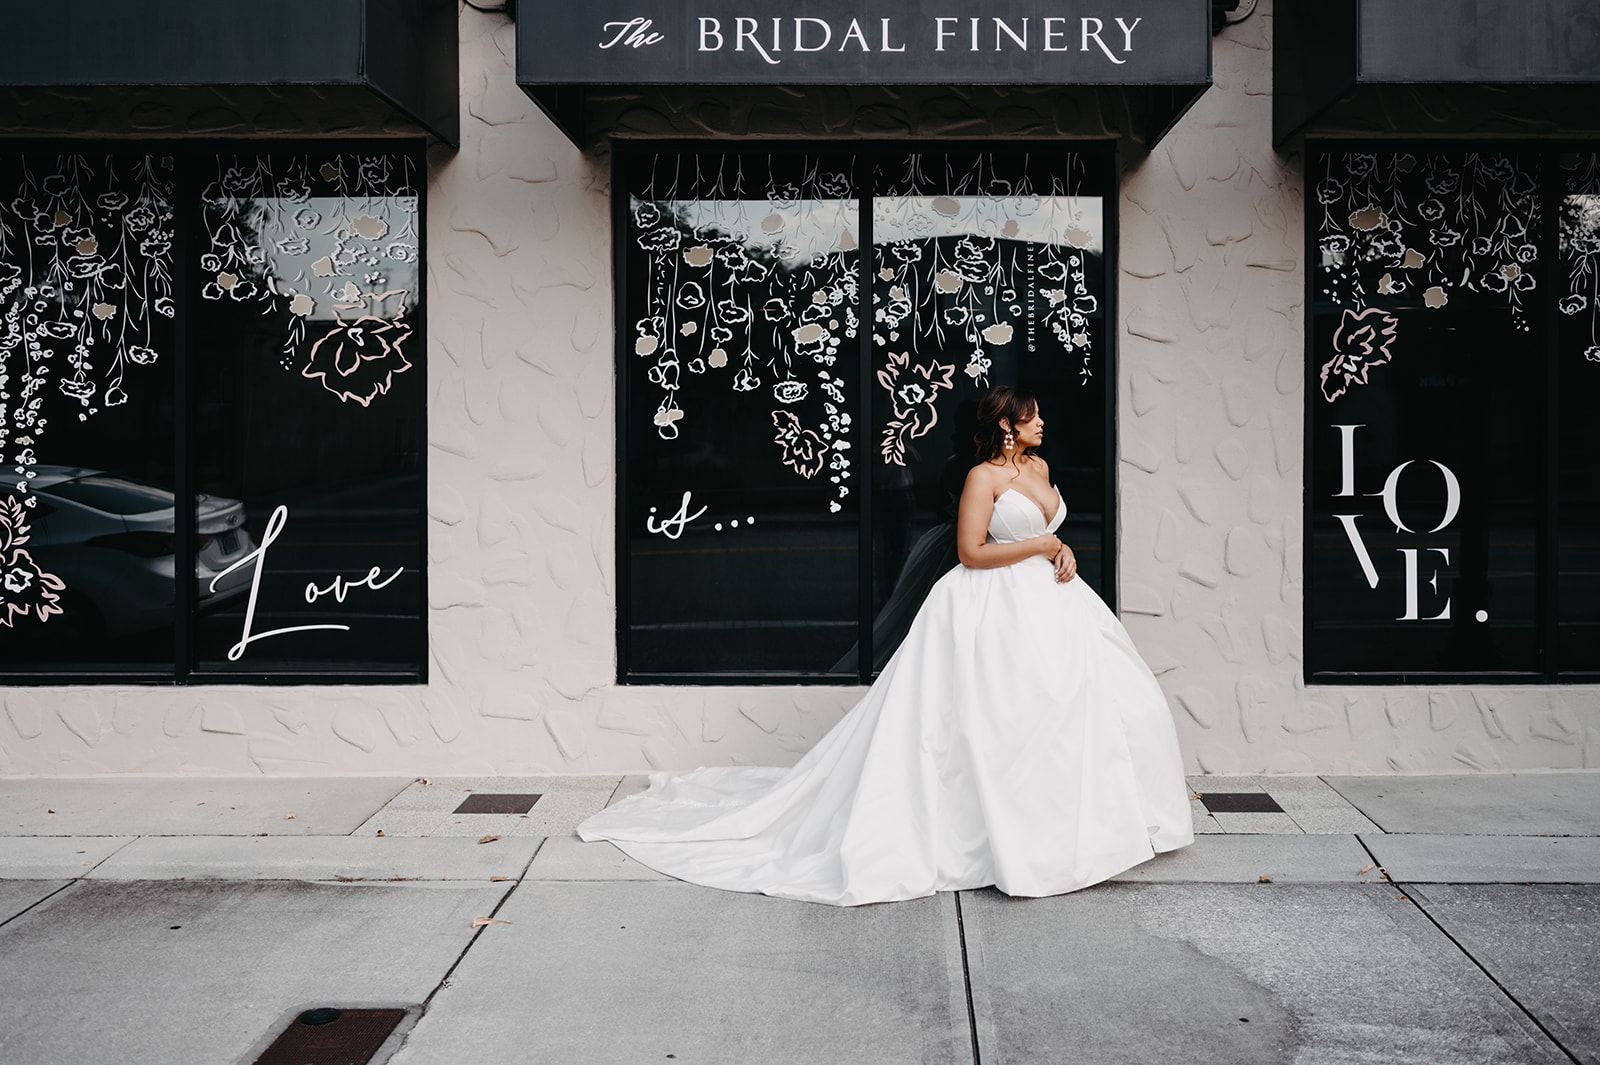 The Bridal Finery